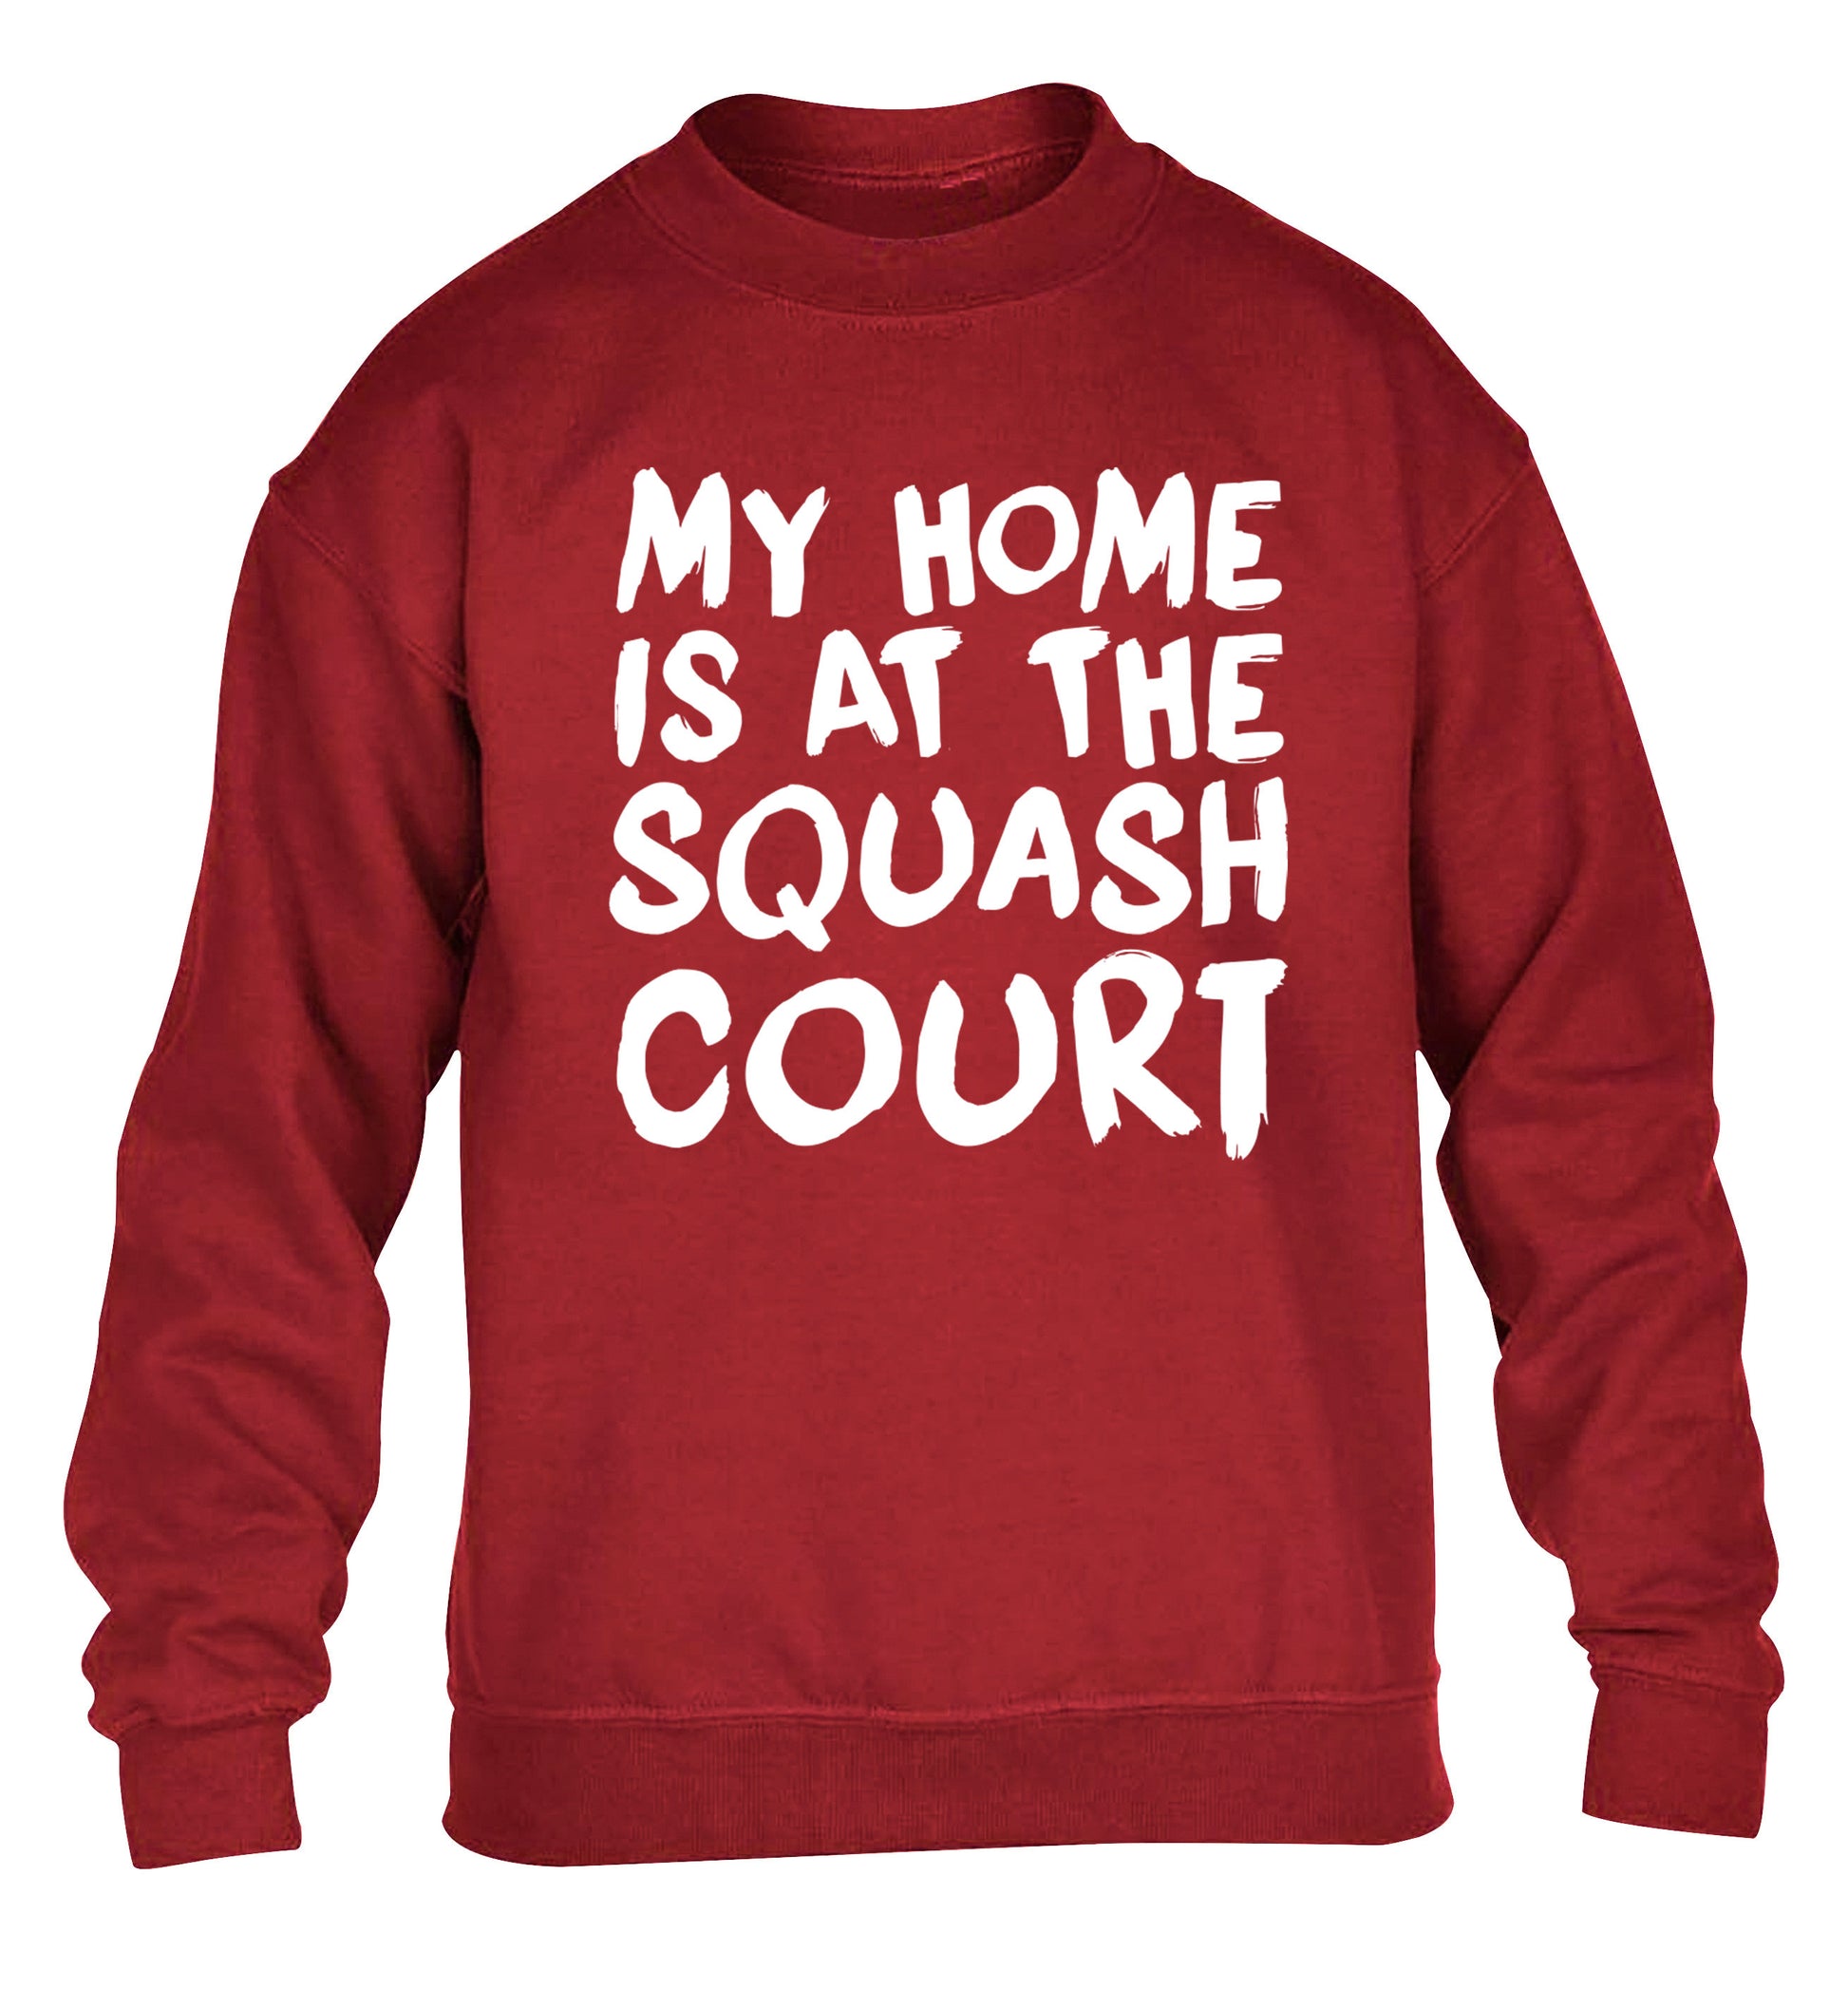 My home is at the squash court children's grey sweater 12-14 Years